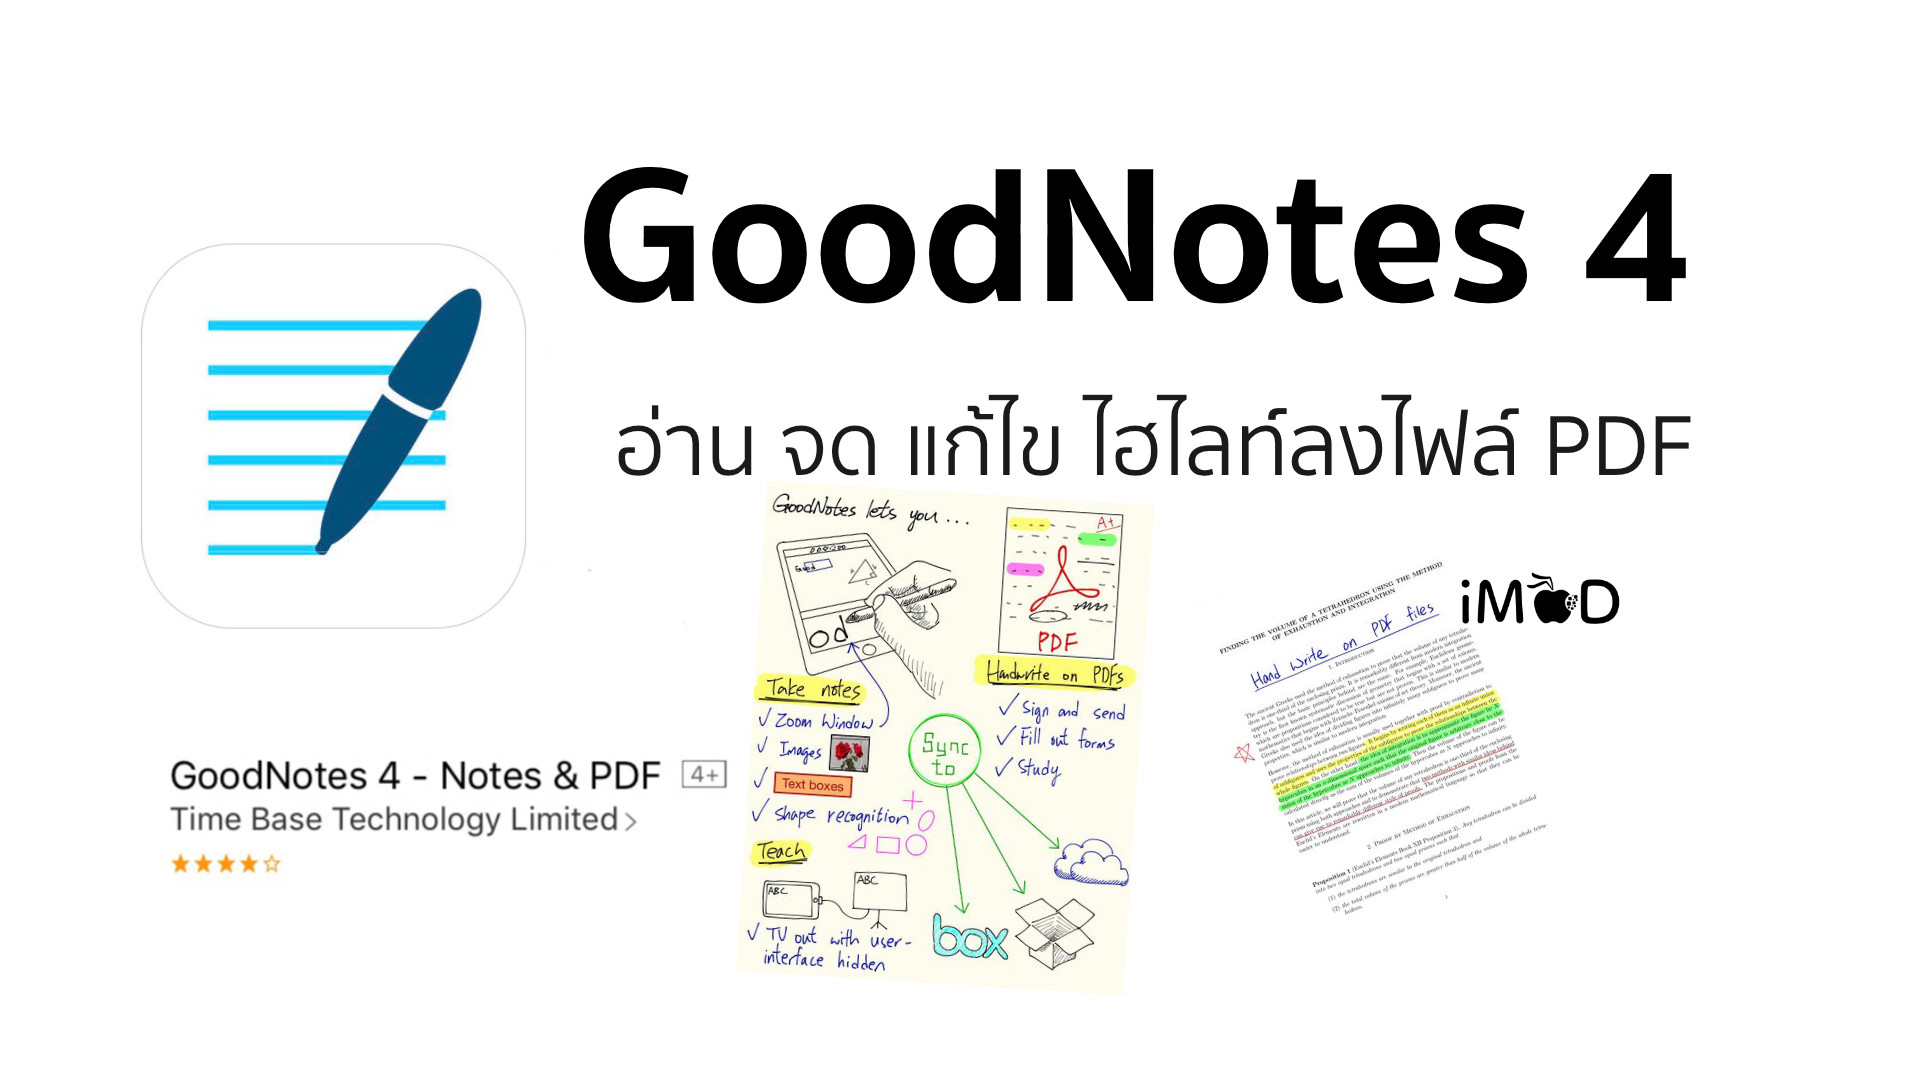 goodnotes 4 evernote